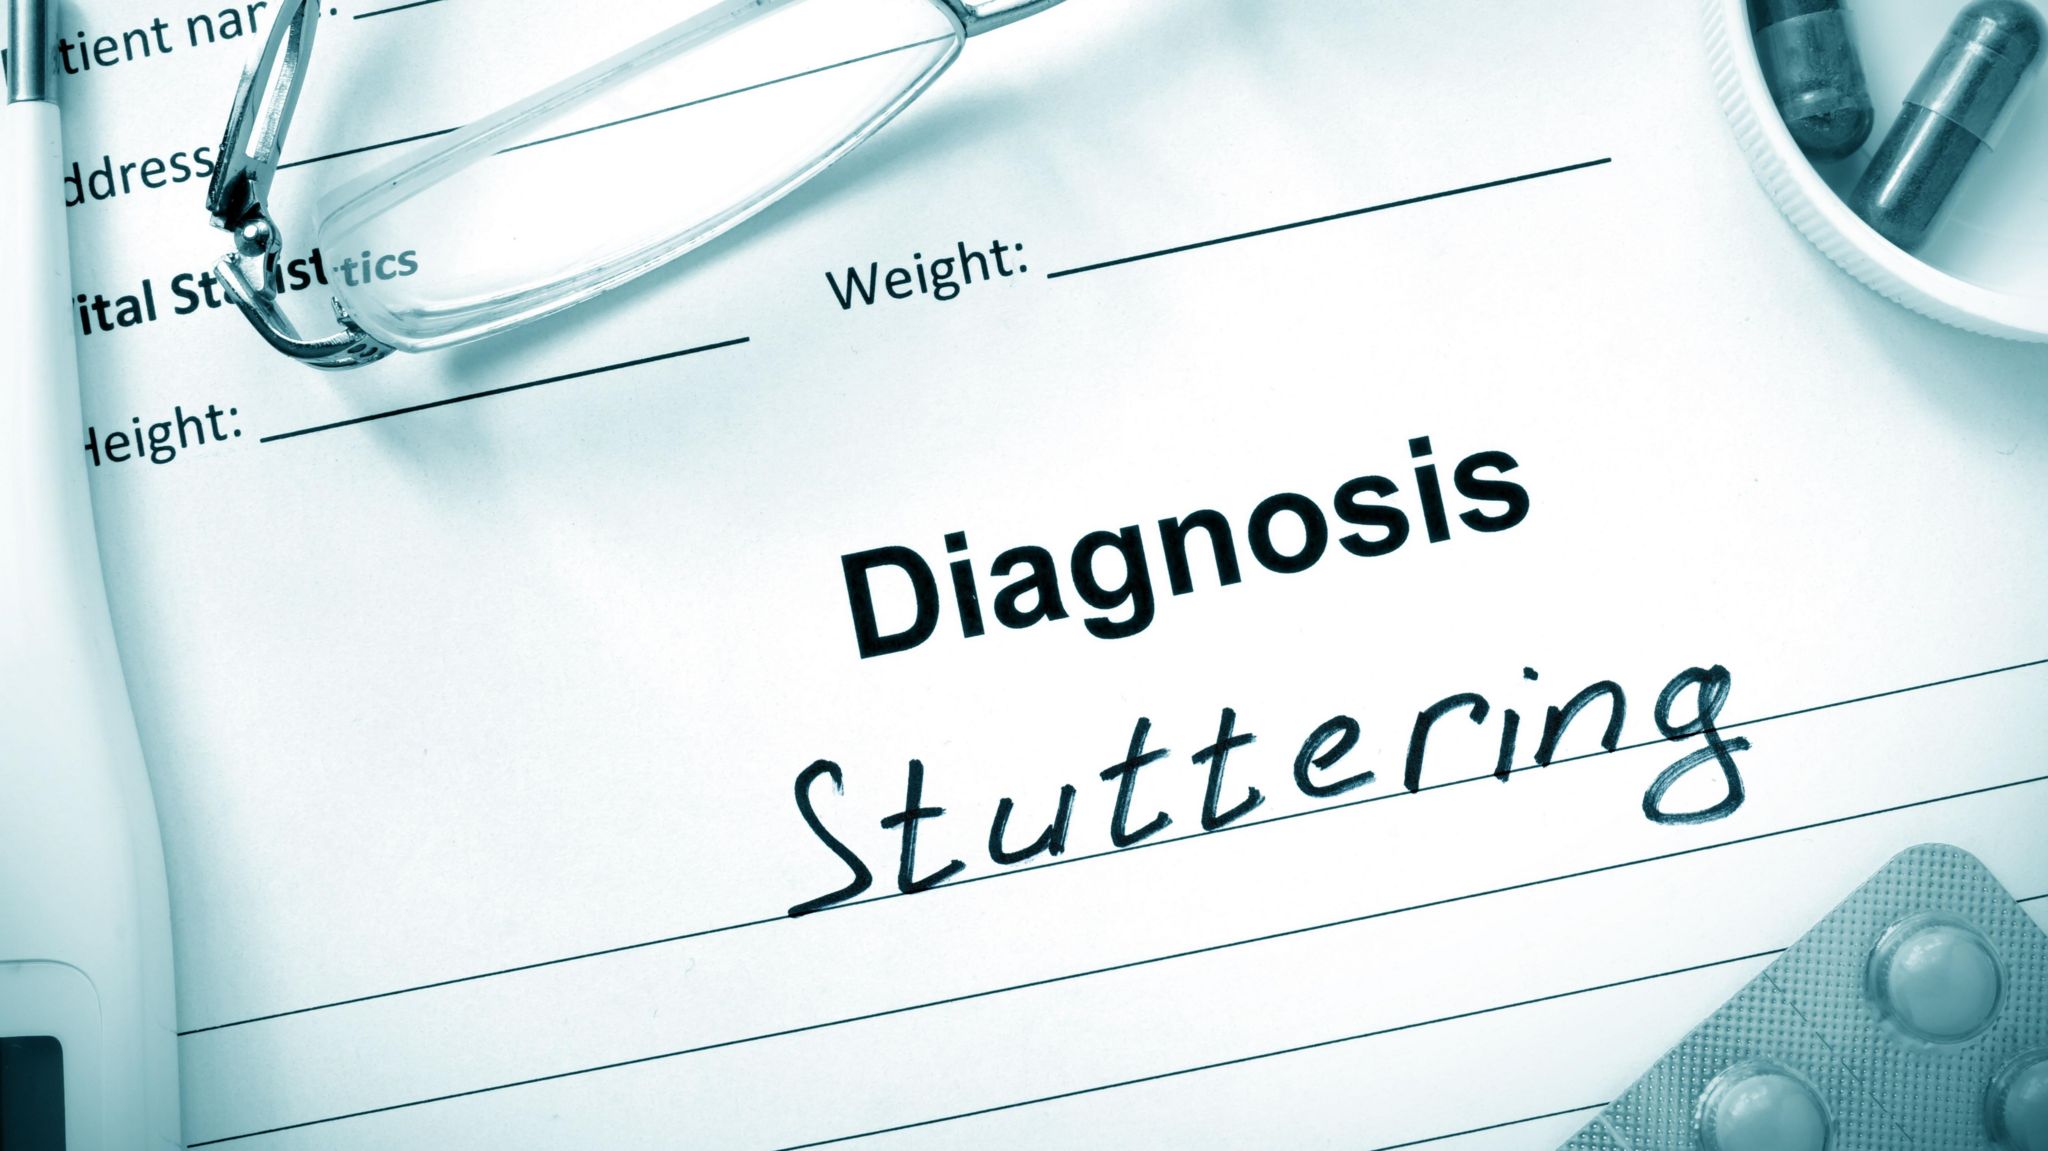 Medical papers diagnosing patient with a stutter 